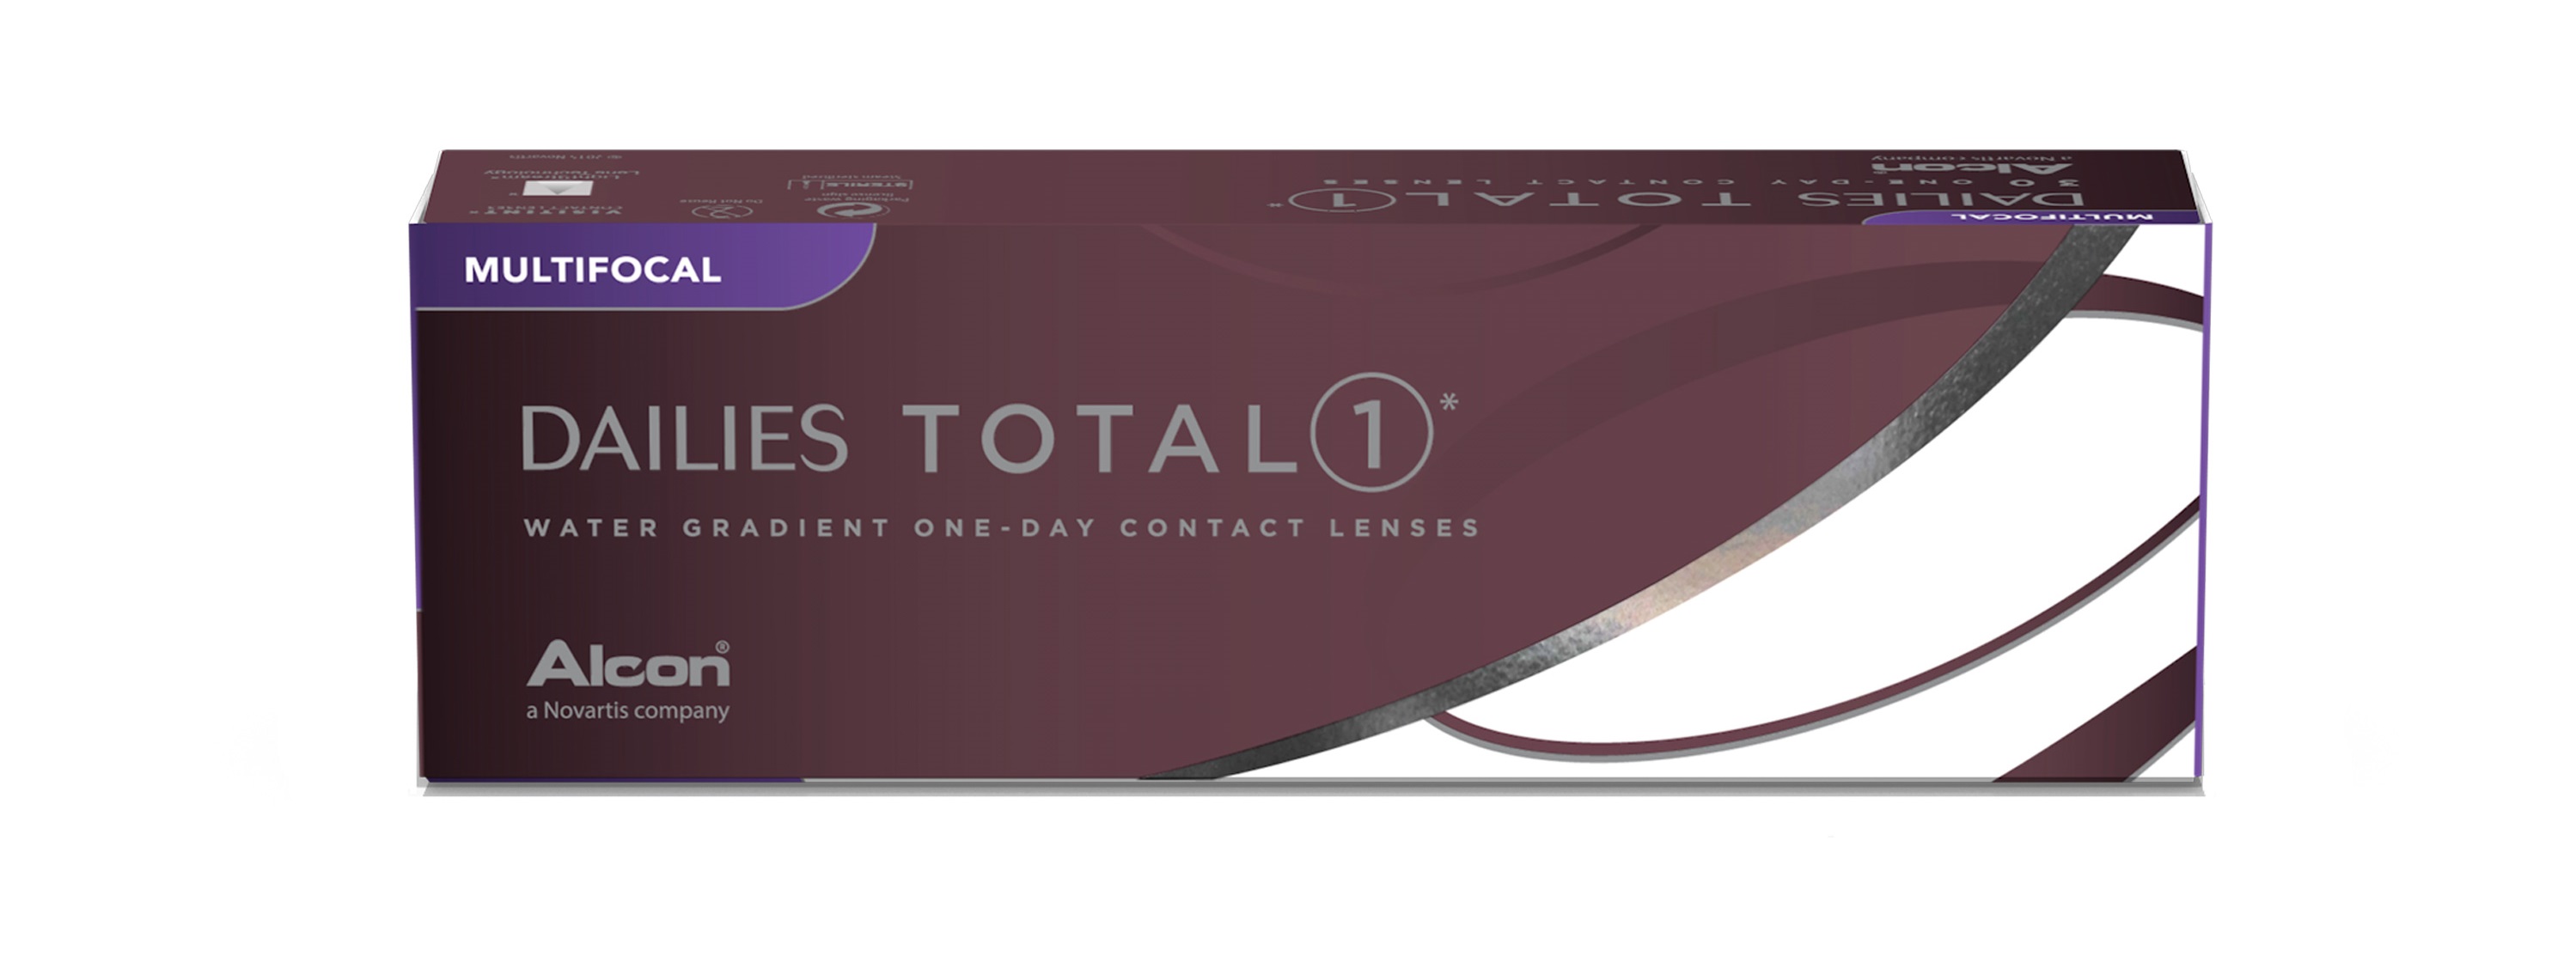 DAILIES TOTAL 1 MULTIFOCAL 30 Pack - Medium Add large view angle 0